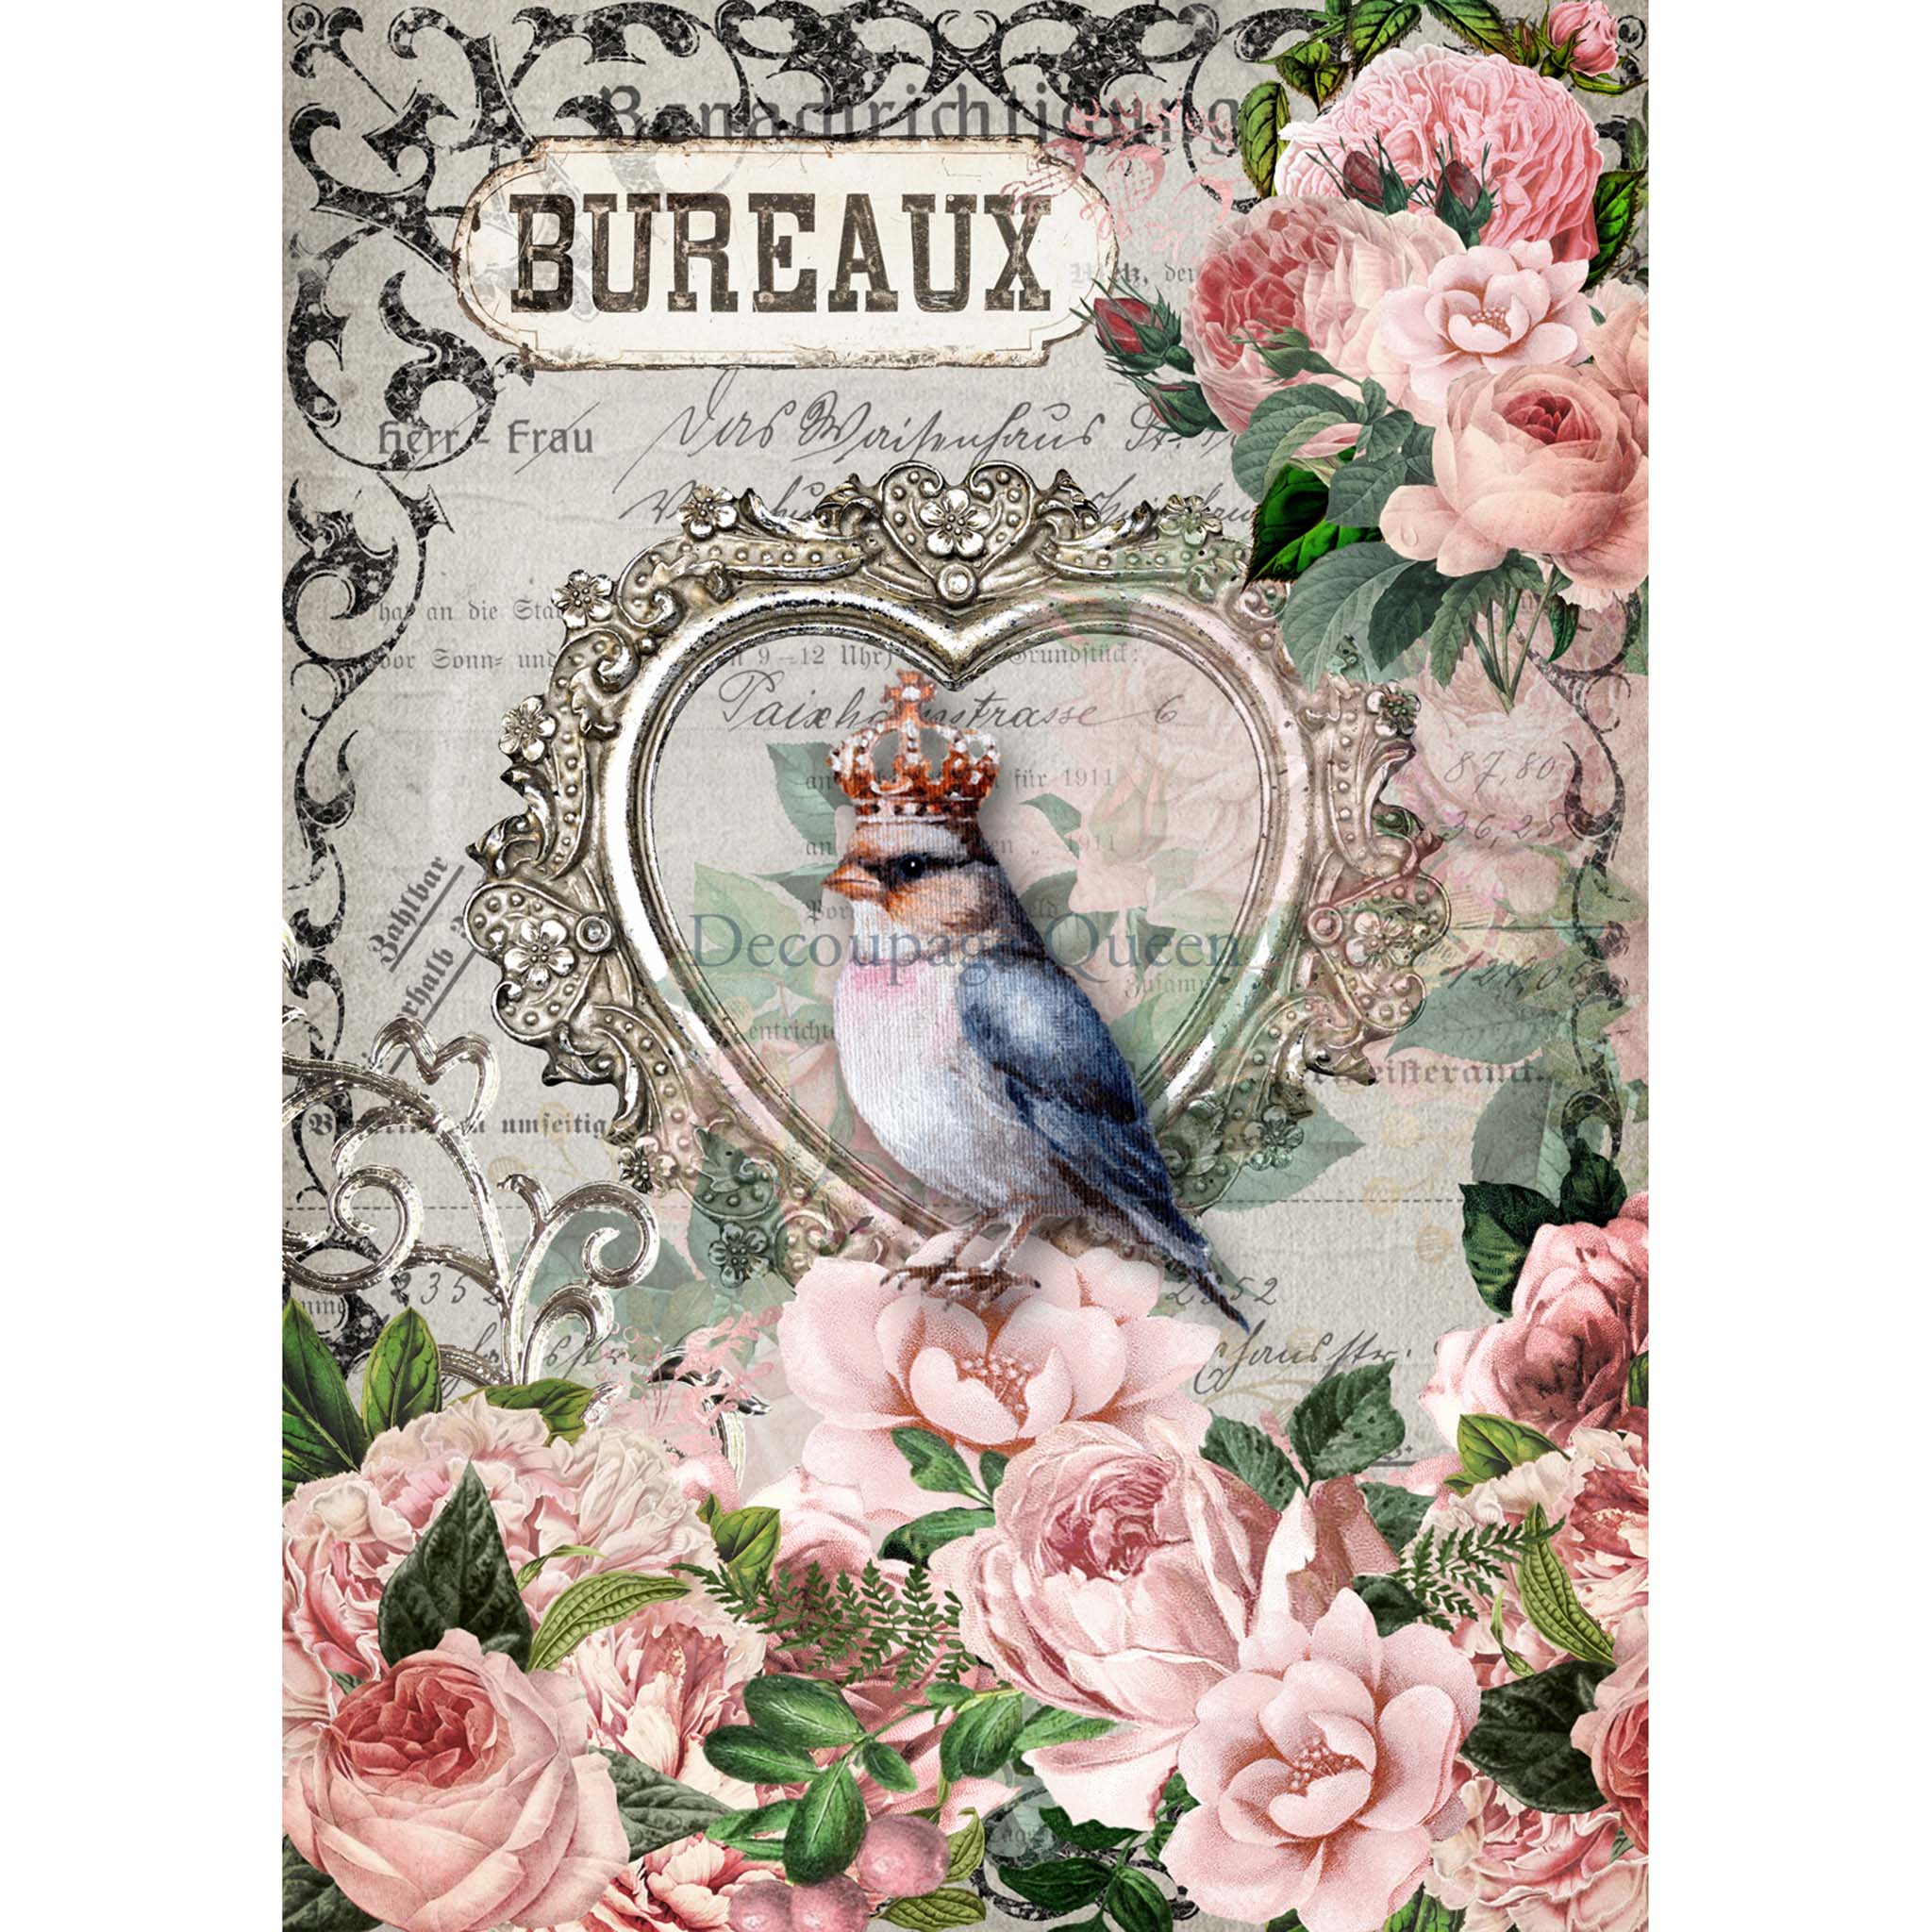 A2 rice paper design that features delicate pink roses, a charming bluebird wearing a crown while sitting in a heart picture frame, and a vintage French document. White borders are on the sides.